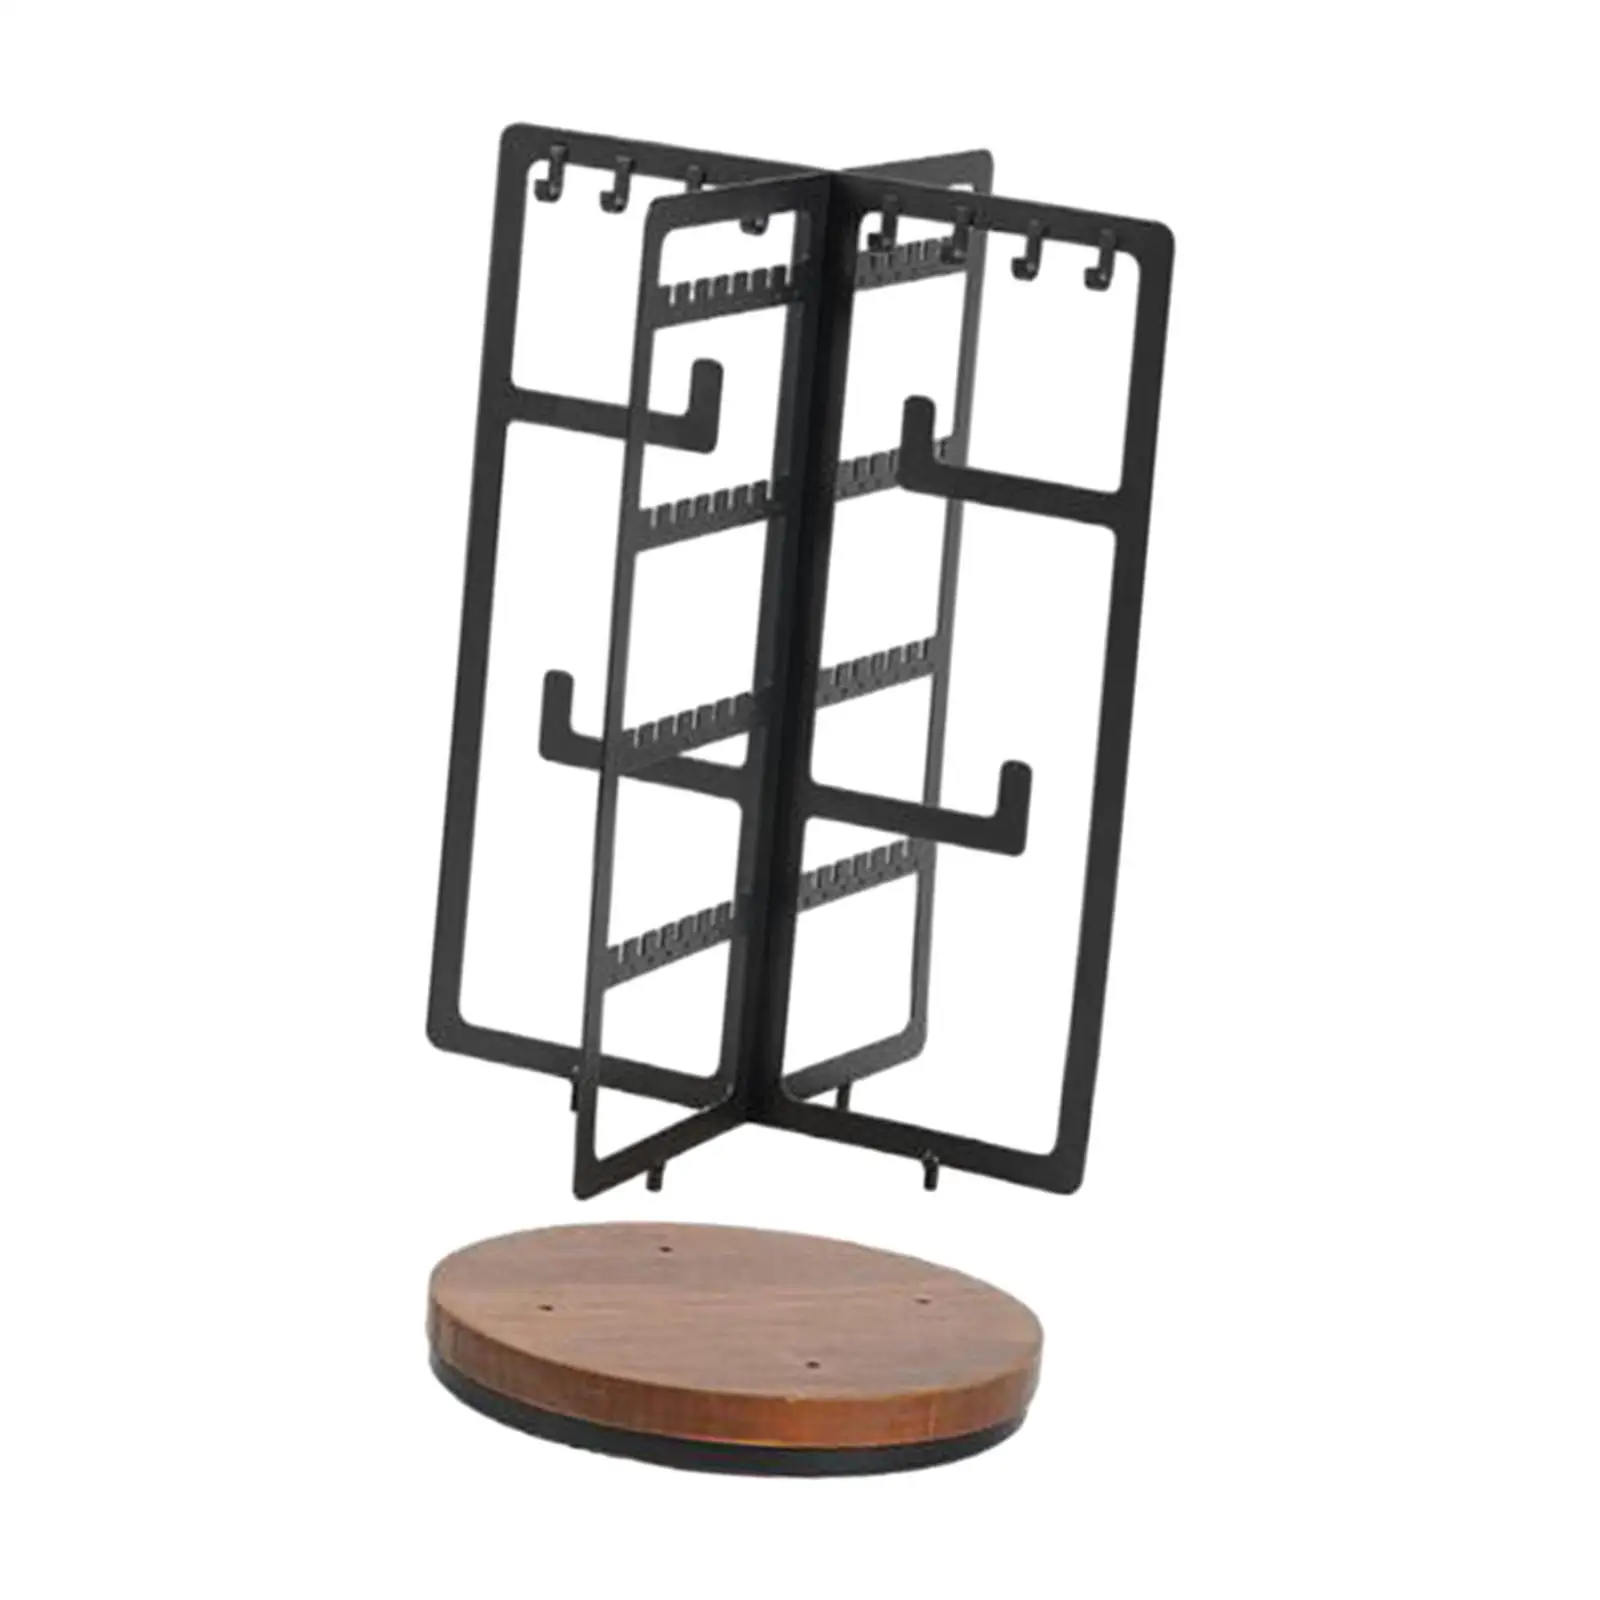 Jewelry Holder Organizer Rotatable for Necklaces Bracelets Display Stand for Shop Showcase Dresser Mall Exhibition Retail Store